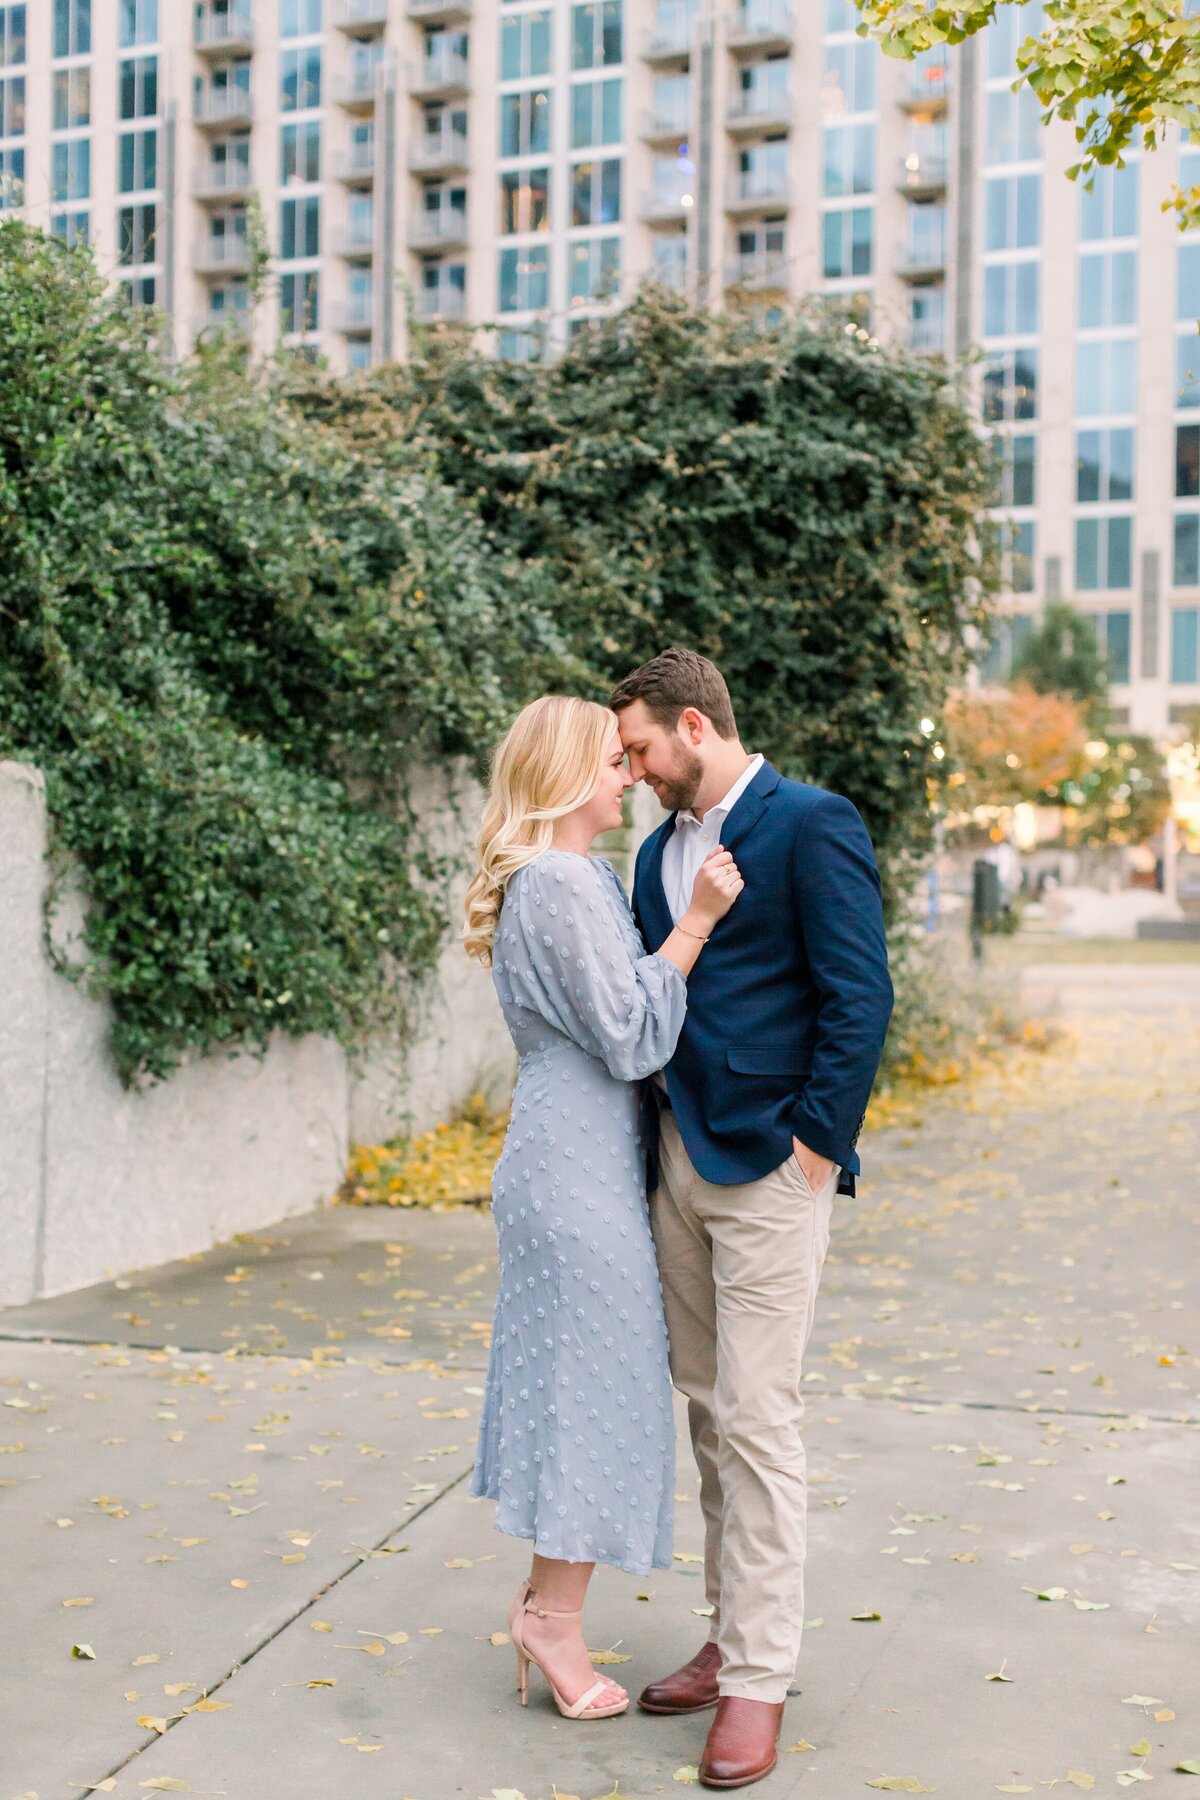 Steve and Sydeny-Engagement Session-Samantha Laffoon Photography-141